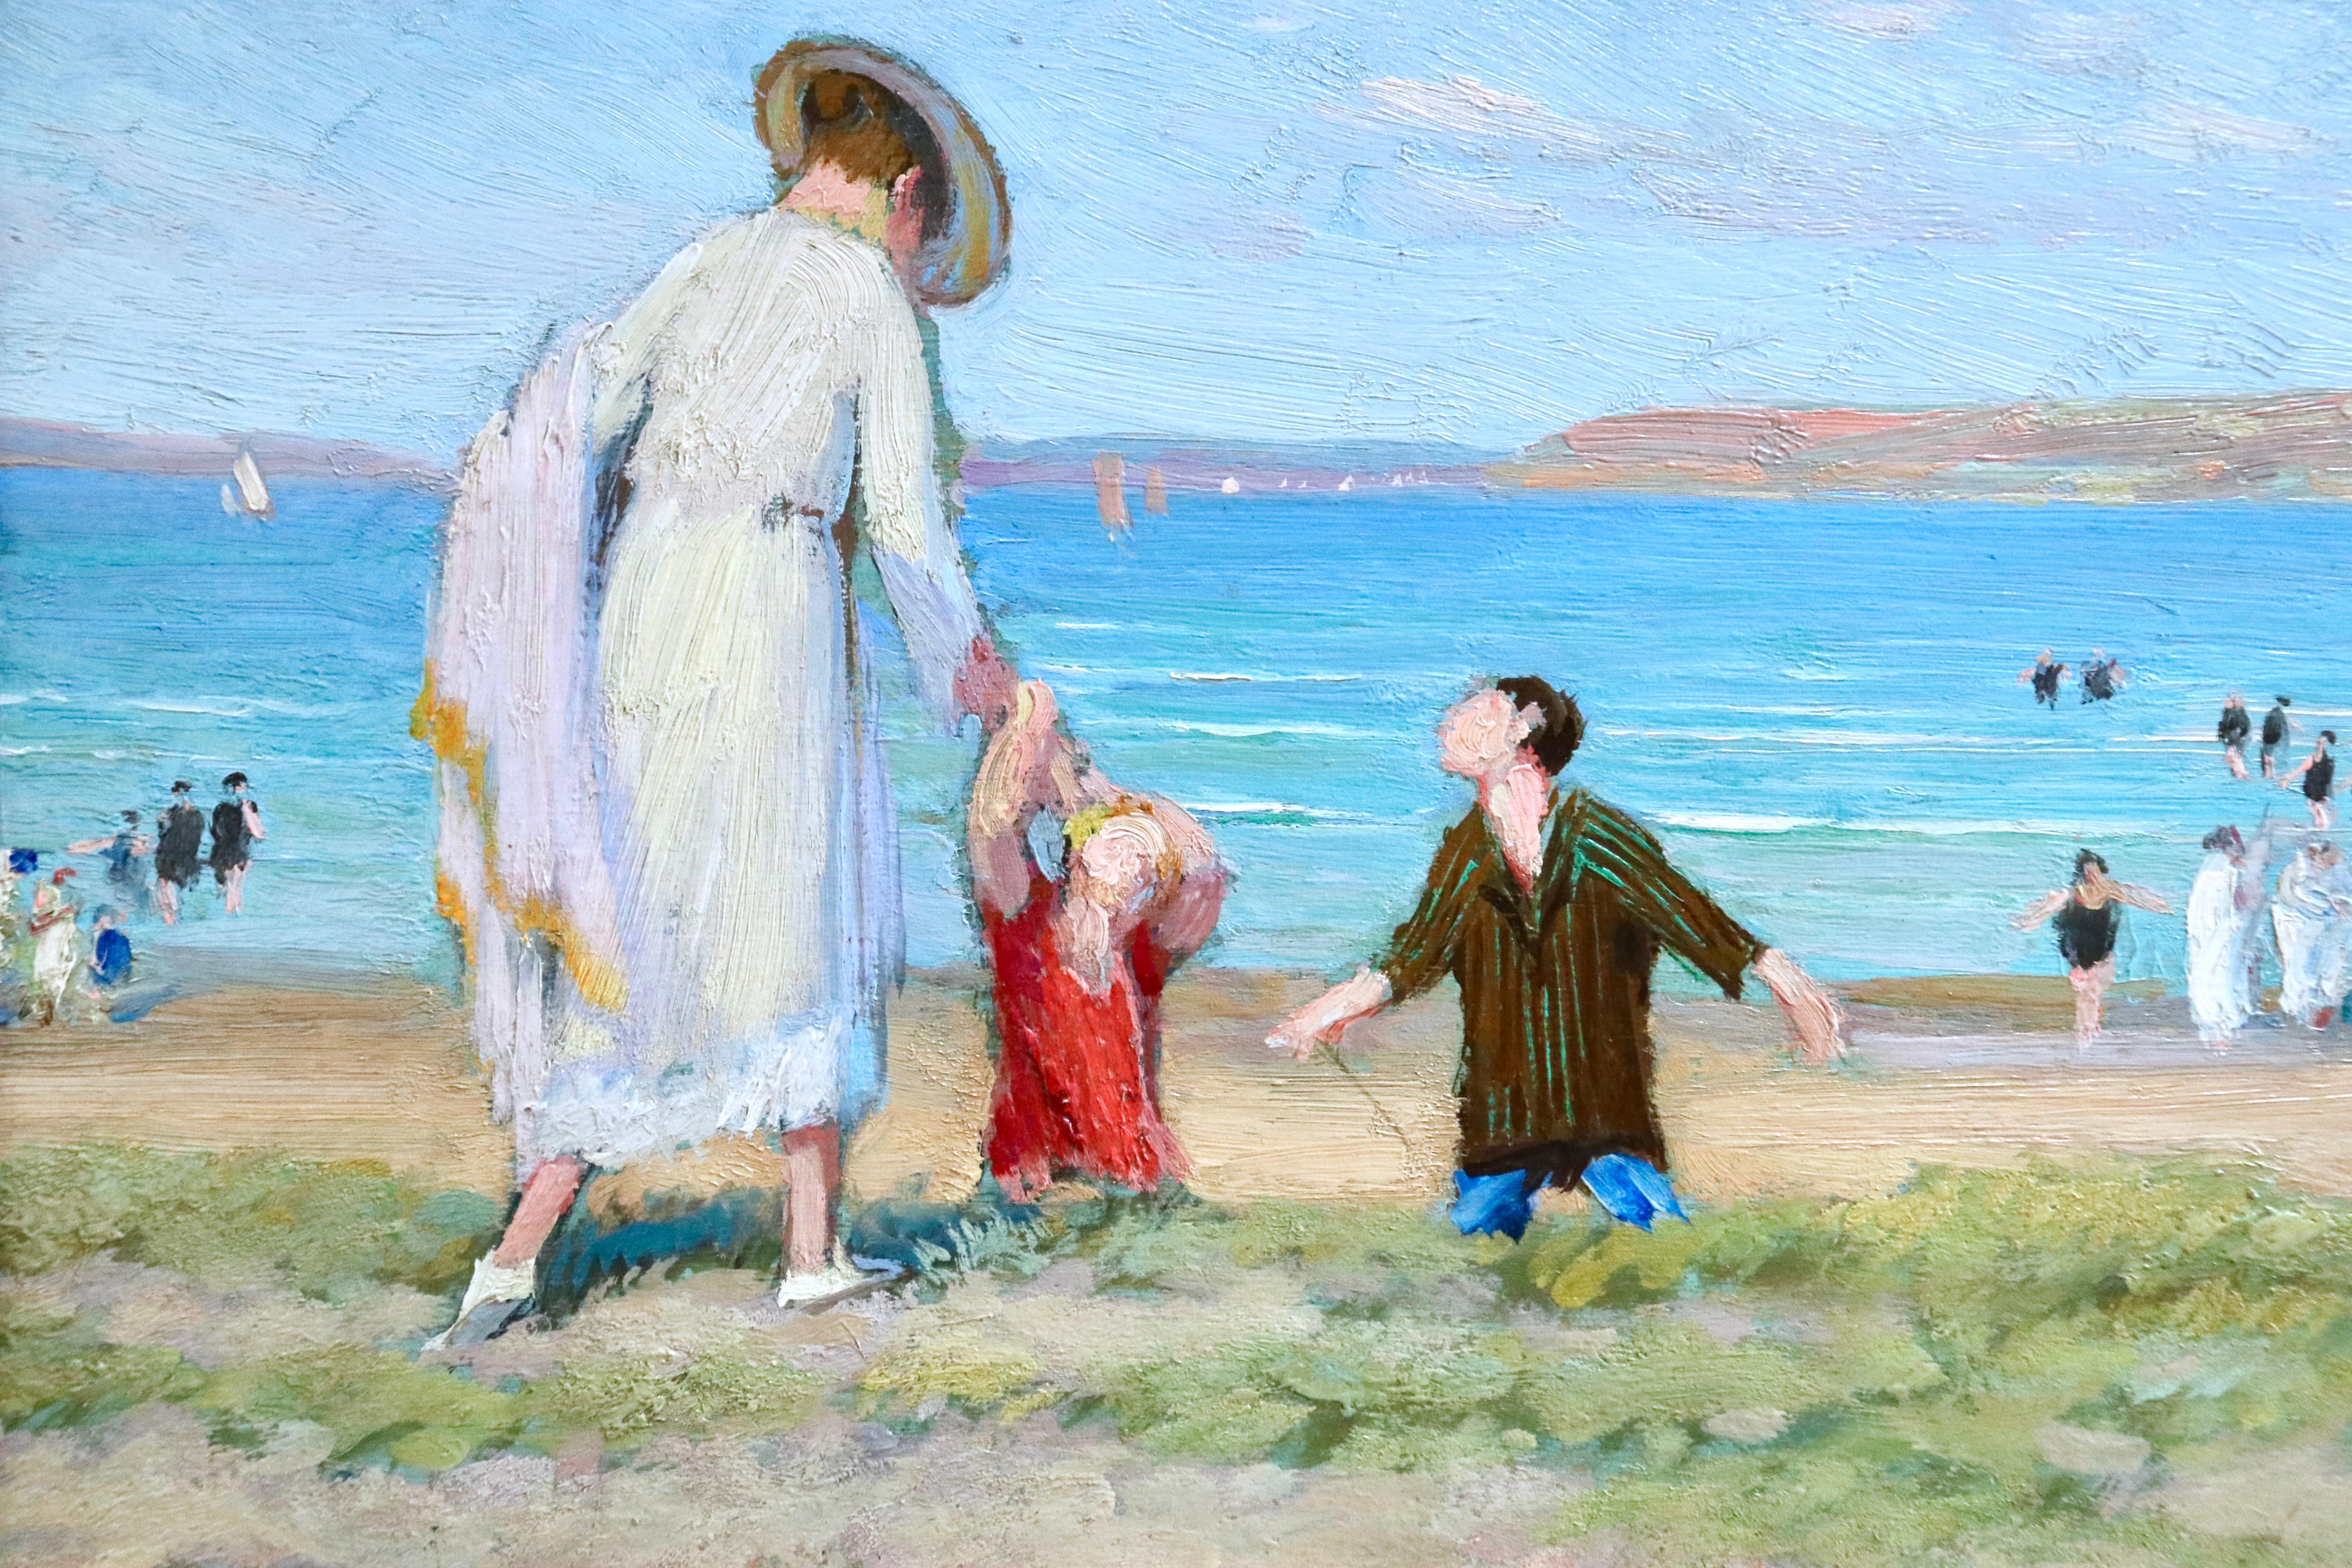 Oil on panel circa 1910 by Gustave Poetzsch depicting a lovely beach scene with mother and children to the forefront. Strikingly coloured and brushed. Signed and inscribed lower right. Framed dimensions are 18 inches high by 21.5 inches